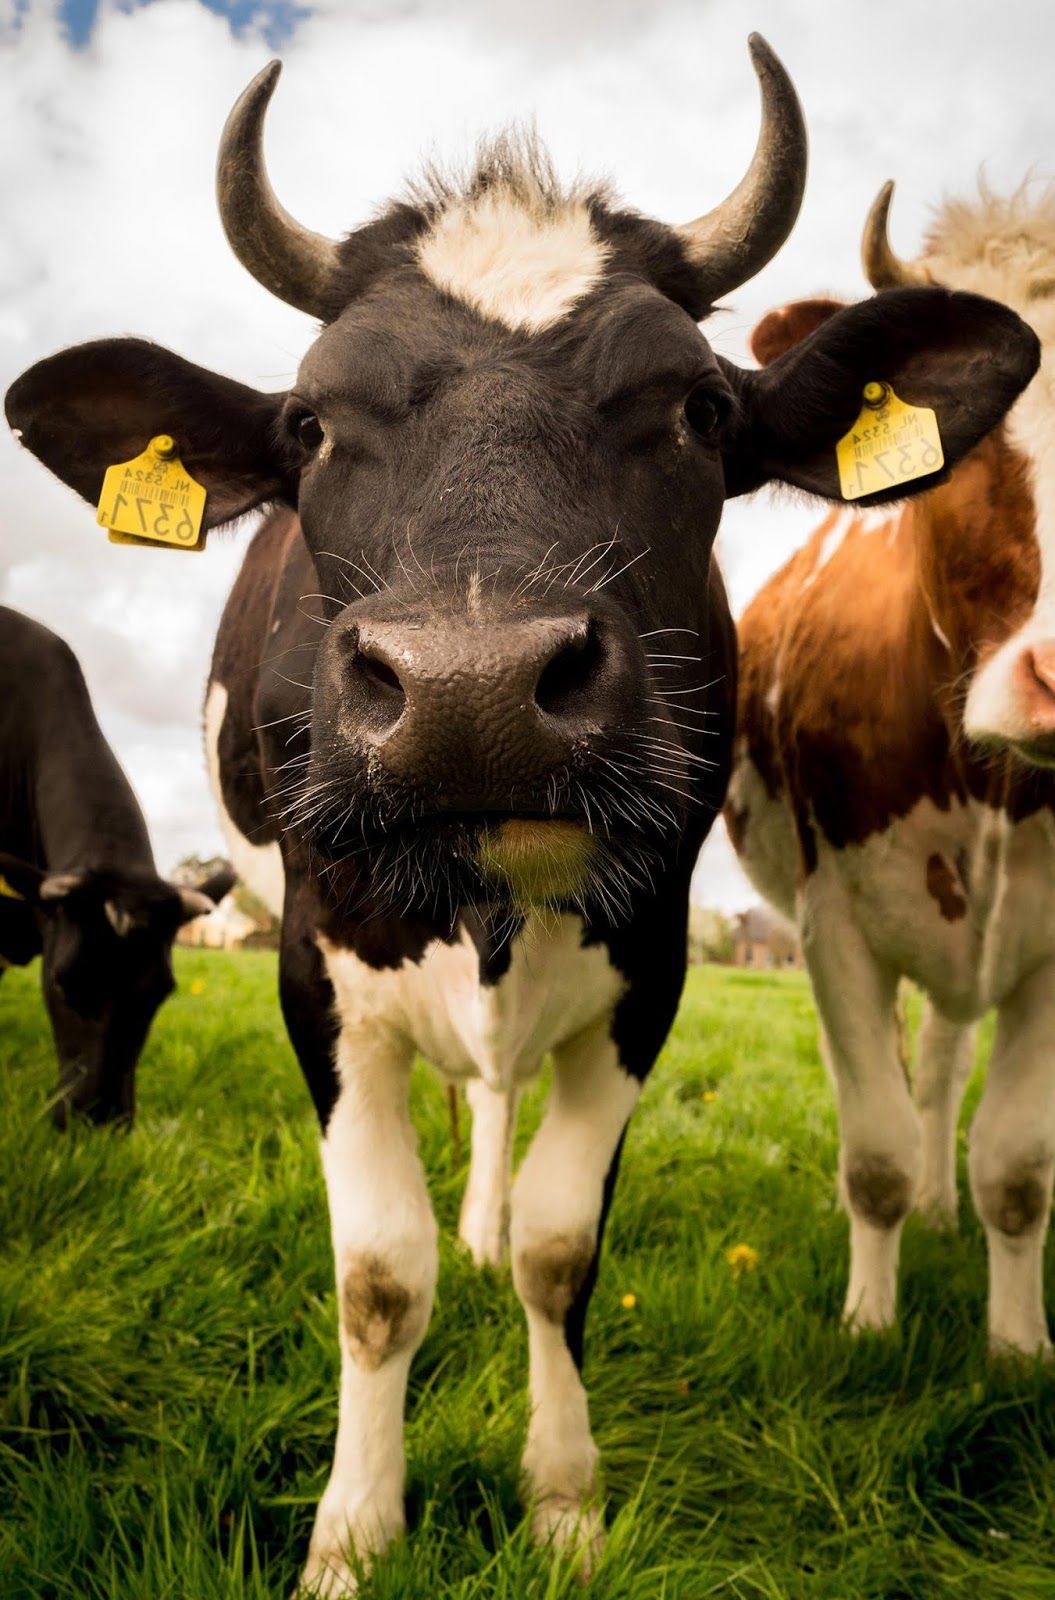 A cow with yellow tags on its ears - Farm